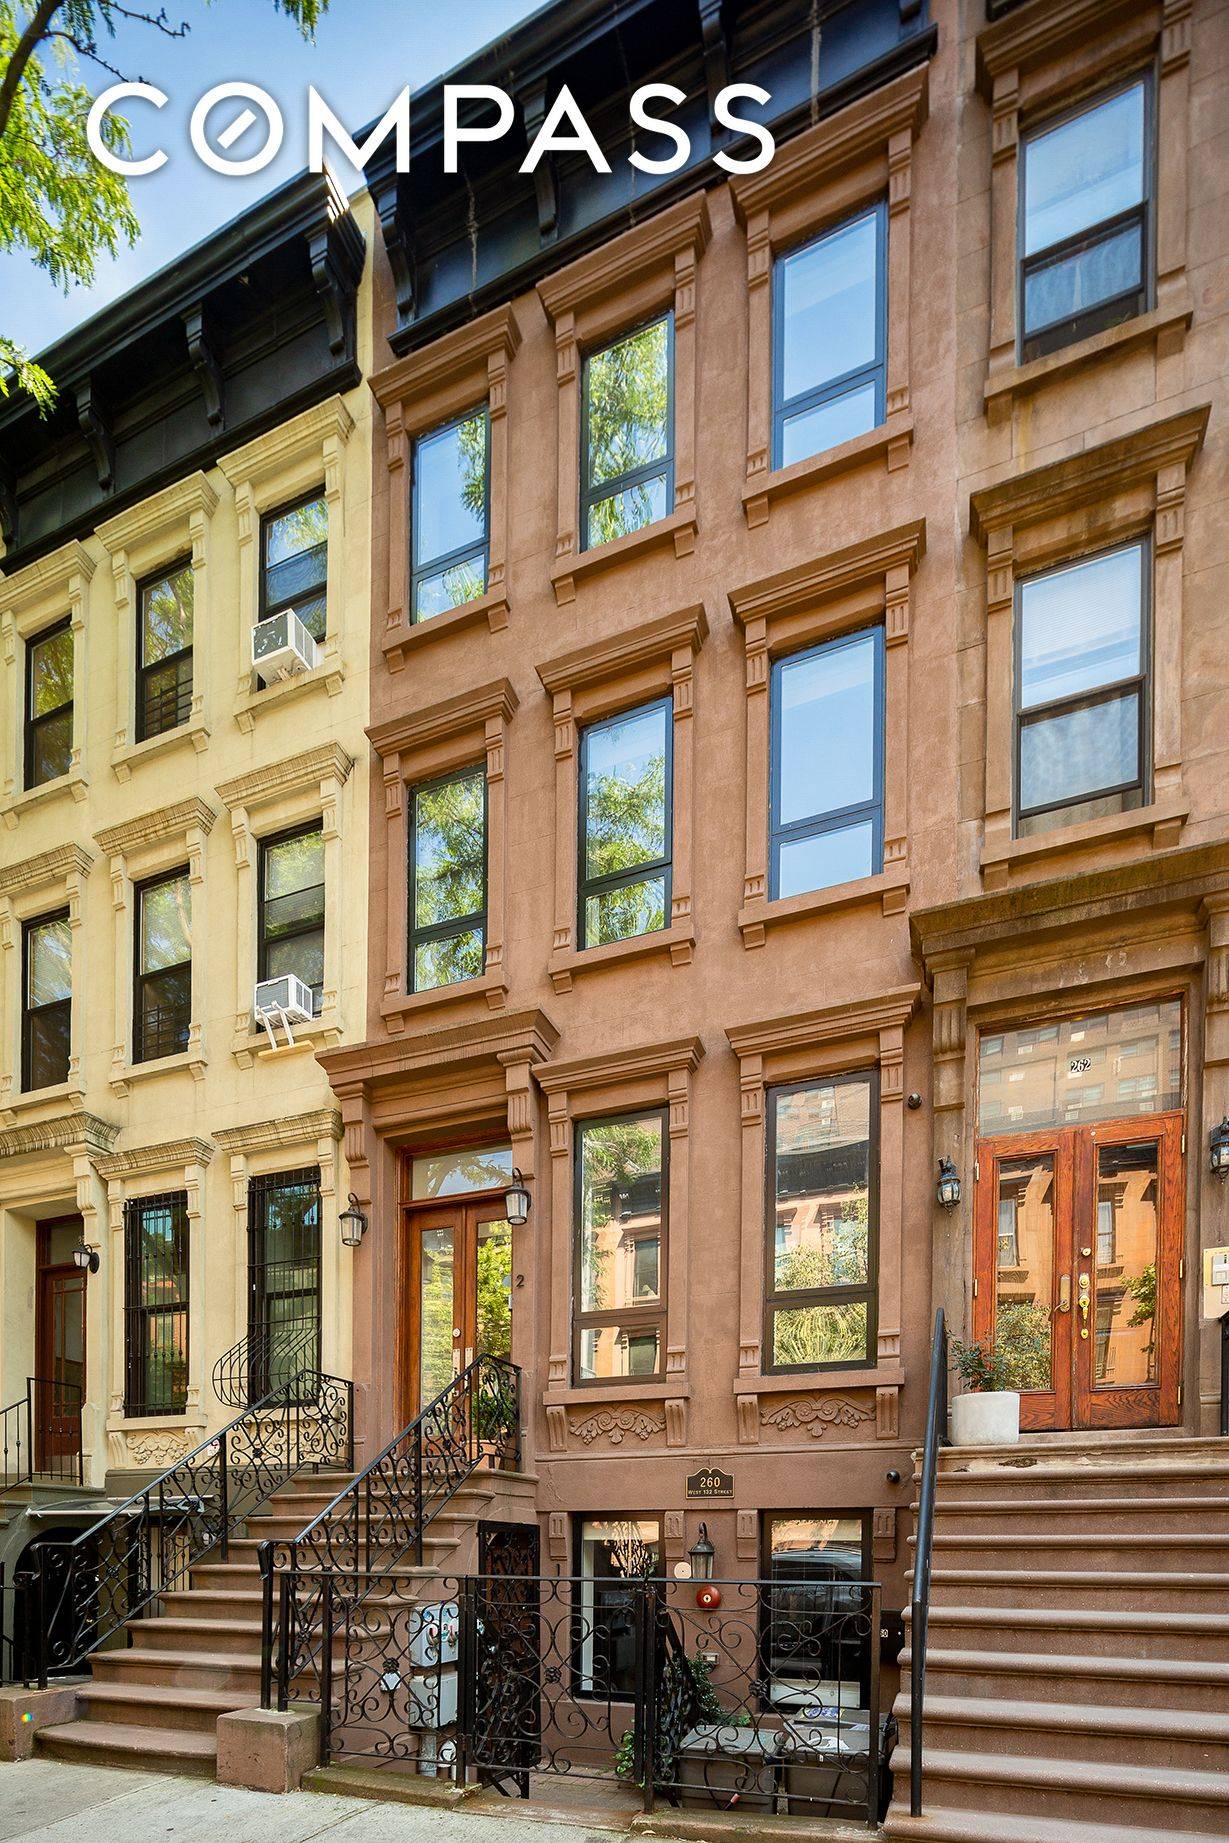 260 West 132nd Street is a stately two family brownstone perfectly situated on a quintessential Harlem block.